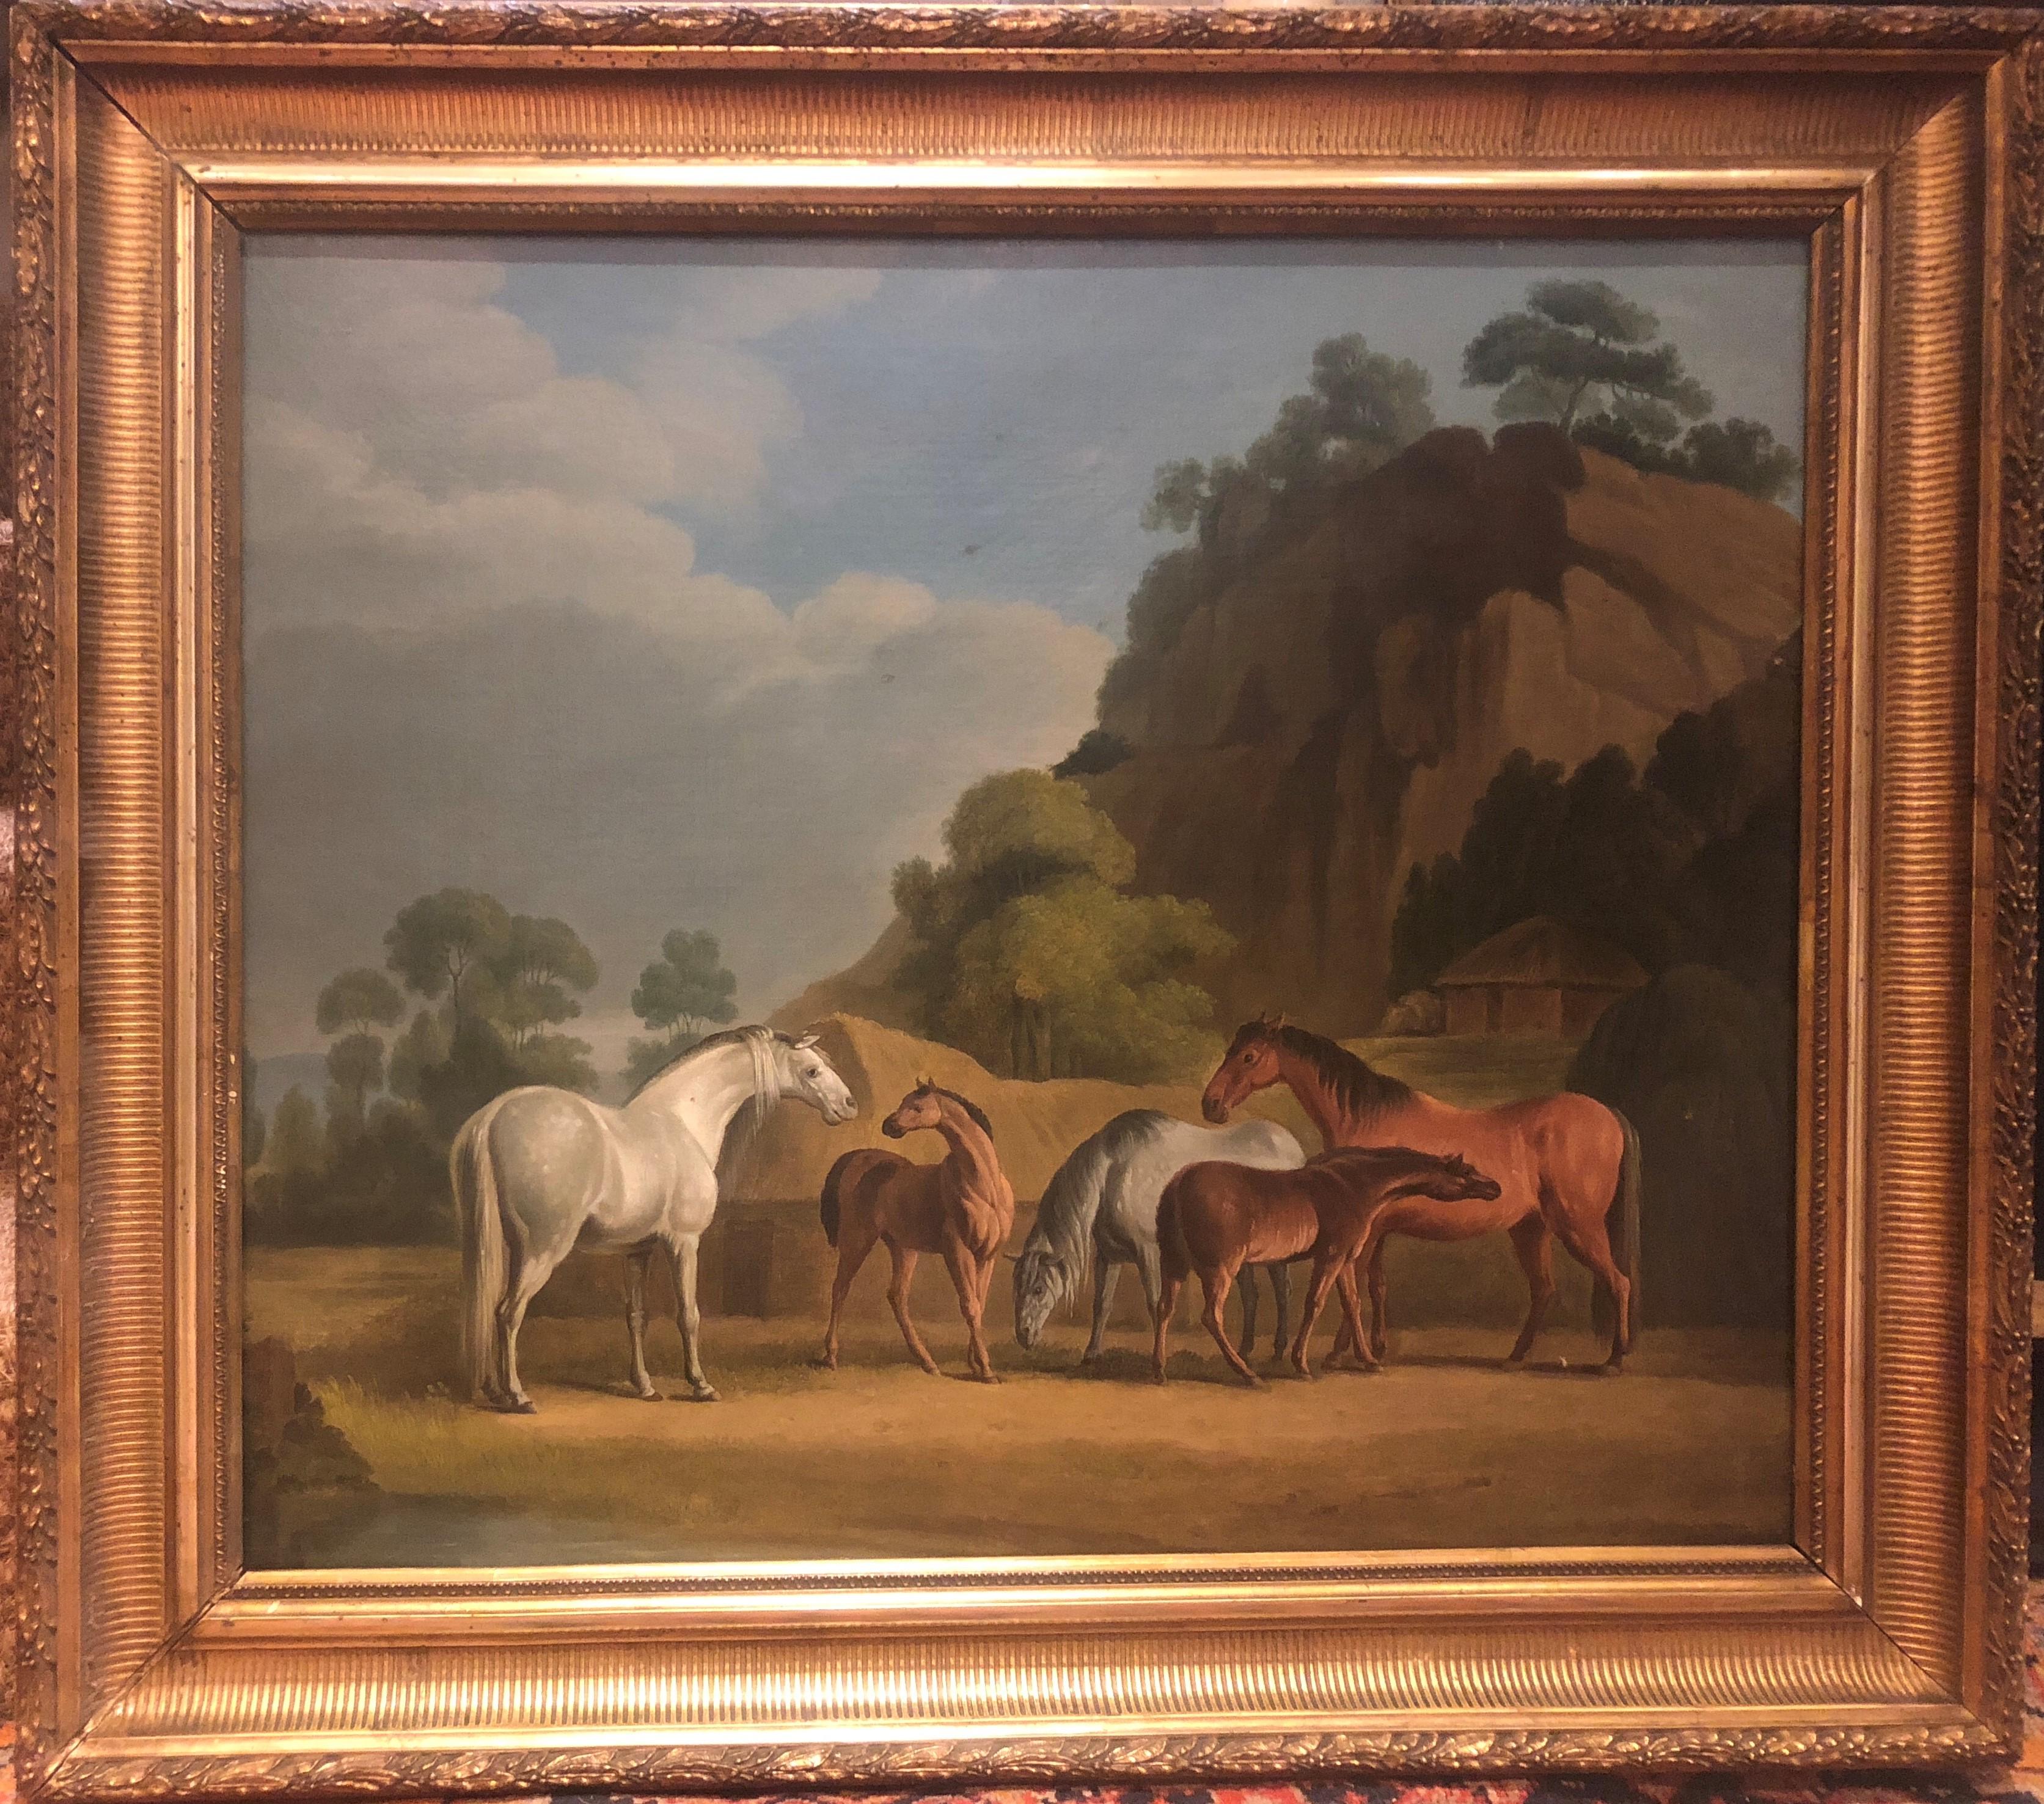 19th Century Oil painting of horses - Mares and Foals in a Landscape